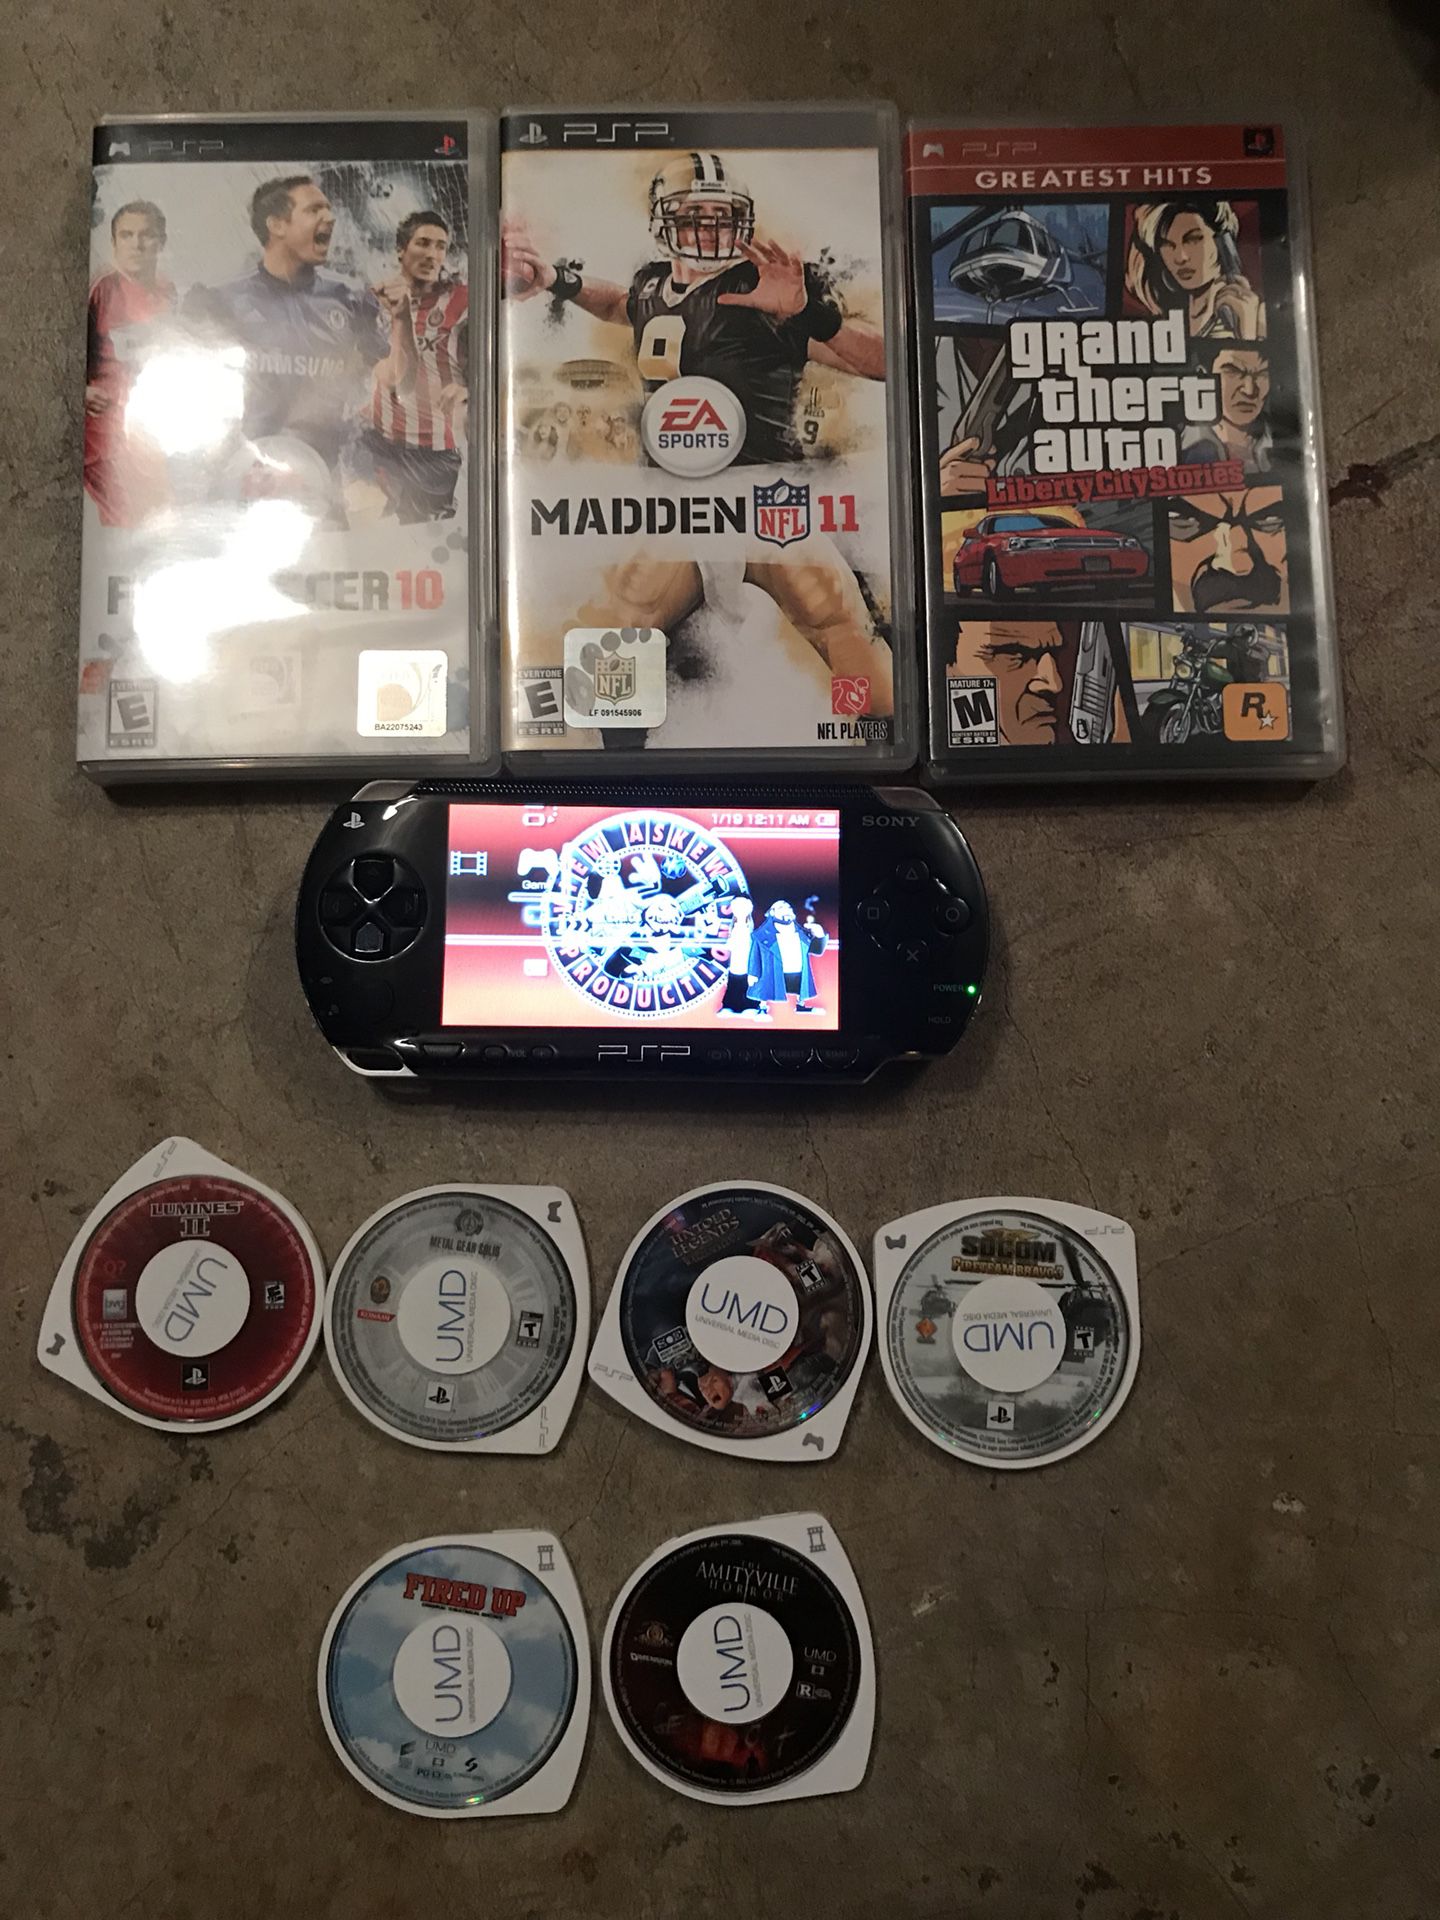 Sony Playstation Portable PSP 1001 & Games